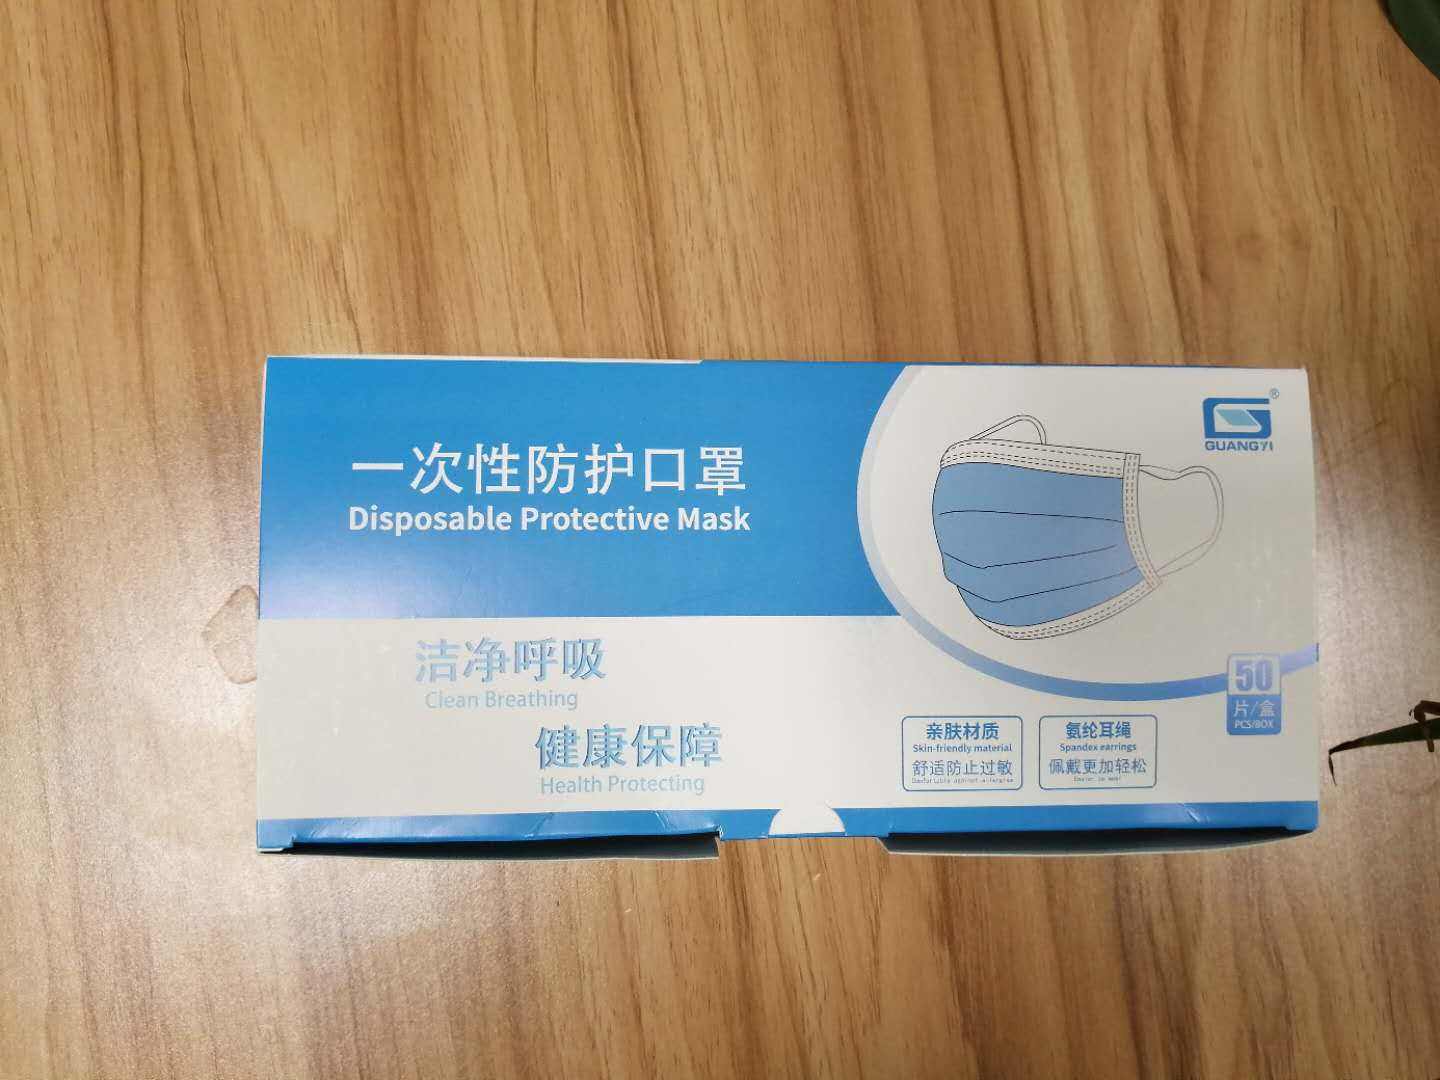 Popular Medical Disposable Absorbent White Cotton Roll Sterile Dental Surgical